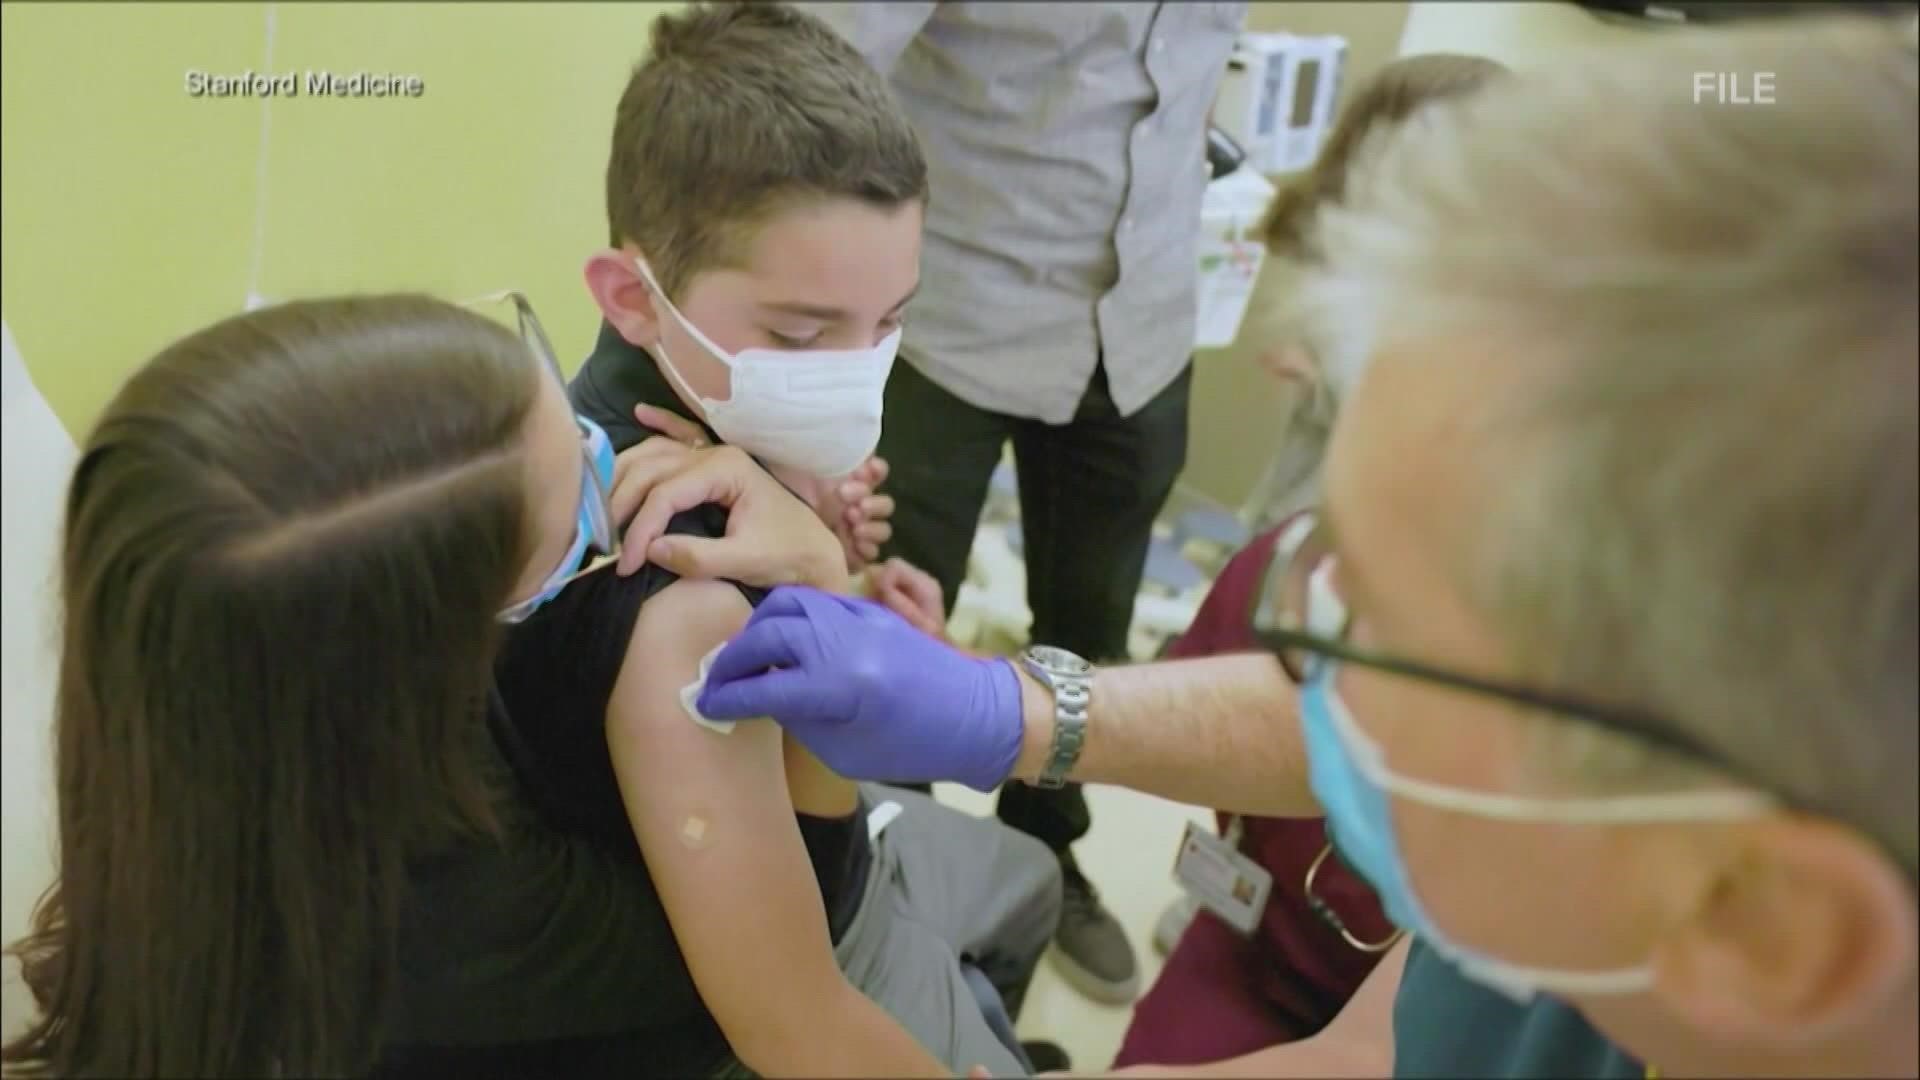 WFAA asked the experts viewer questions about the vaccine approval and what it means for some kids. Here are some of those answers.